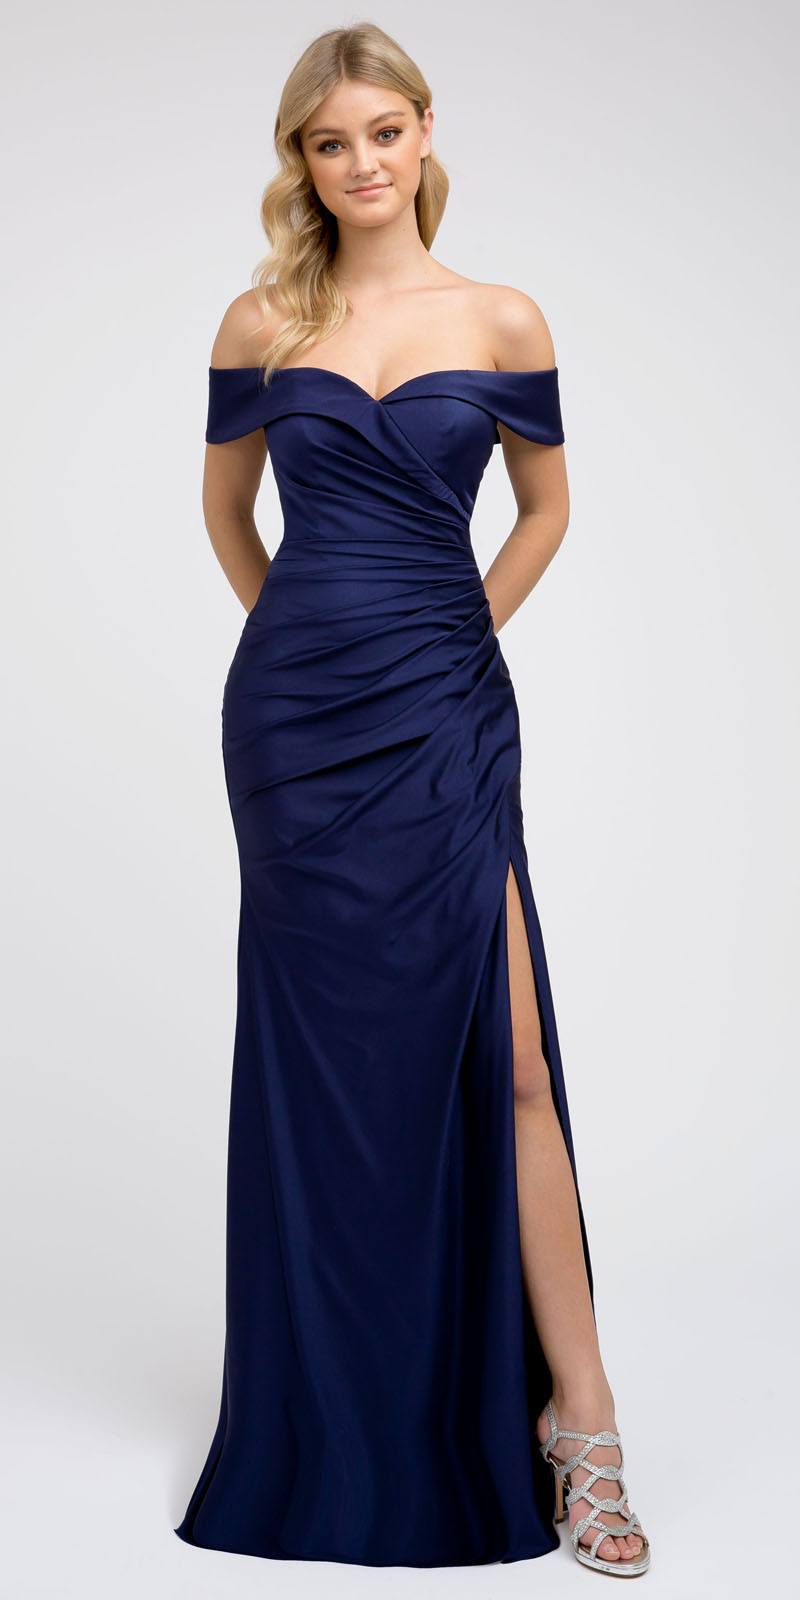 Off-Shoulder Fit and Flare Long Prom Dress Navy Blue with Slit